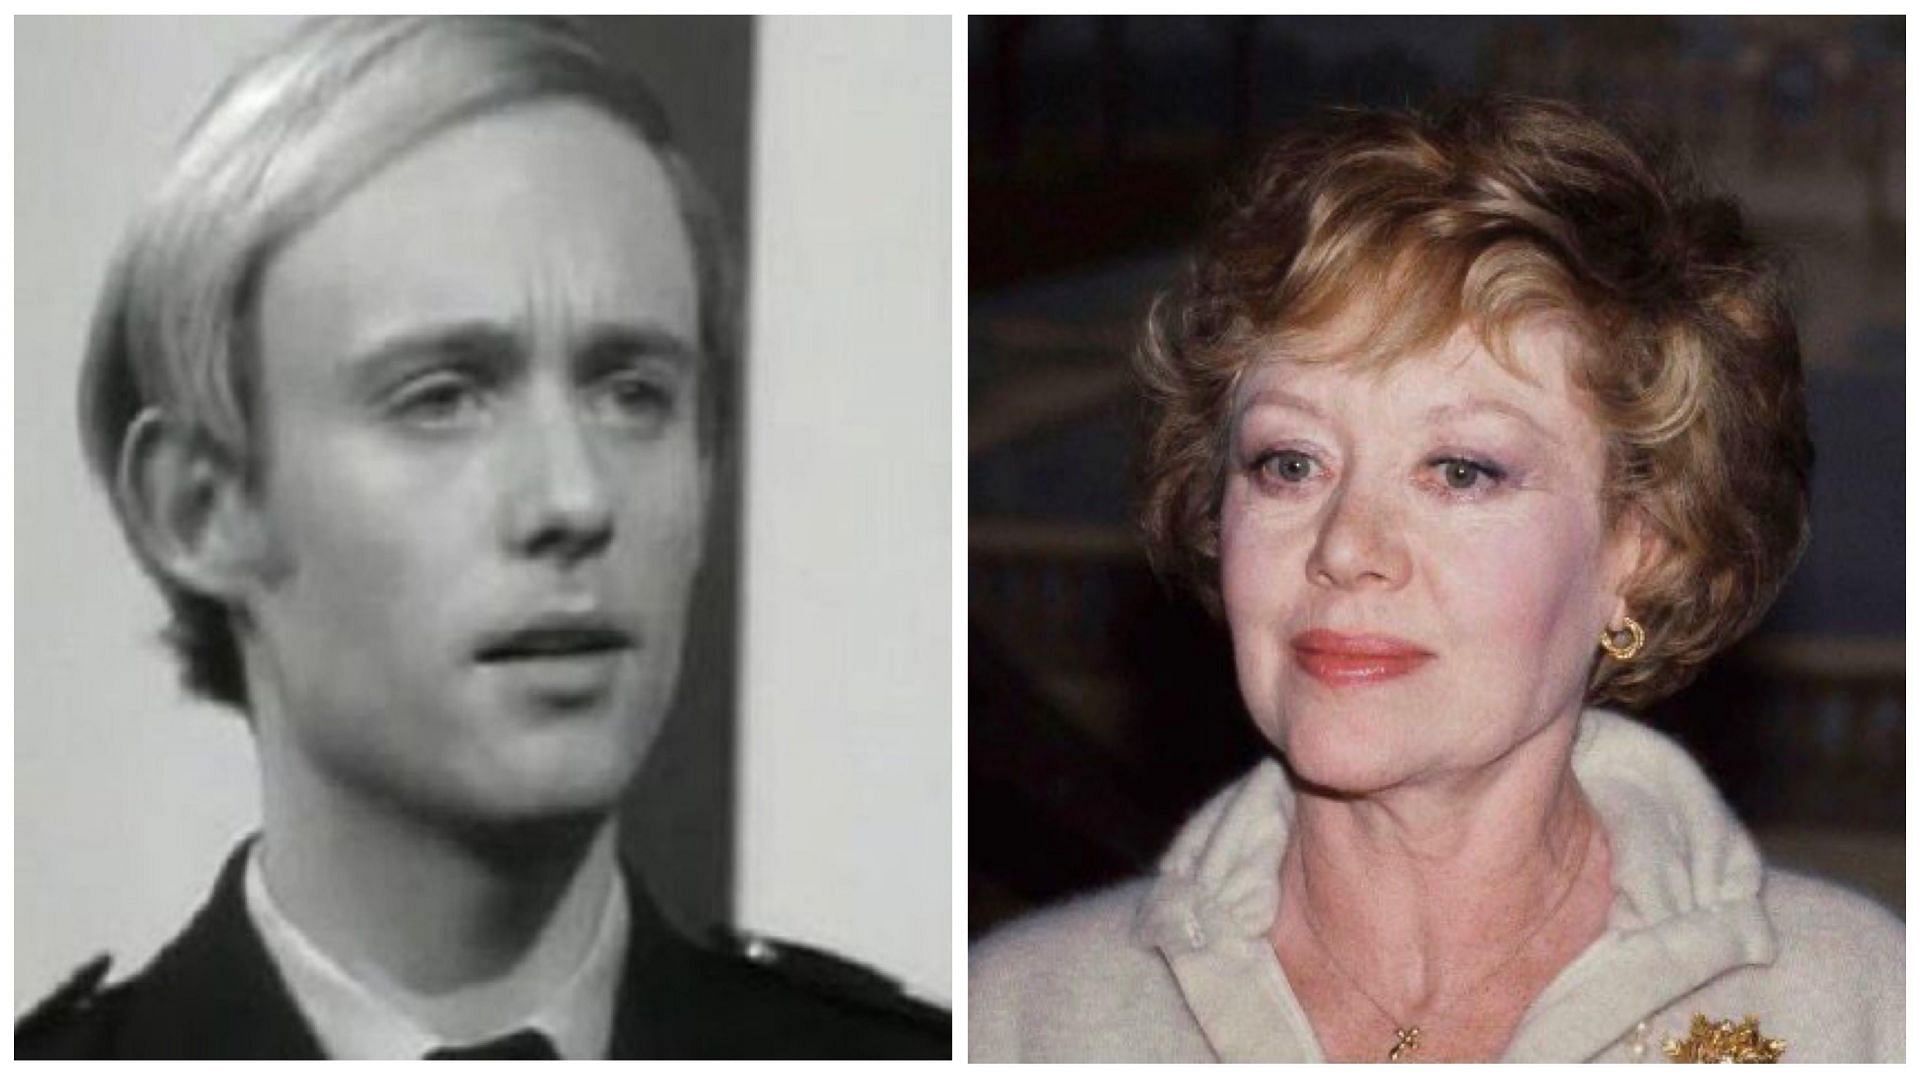 Gareth Forwood (left) son of actress Glynis Johns (right) died due to cancer in 2007 (Image via @MarkFow74007631 and @MarkFow74007631/X)